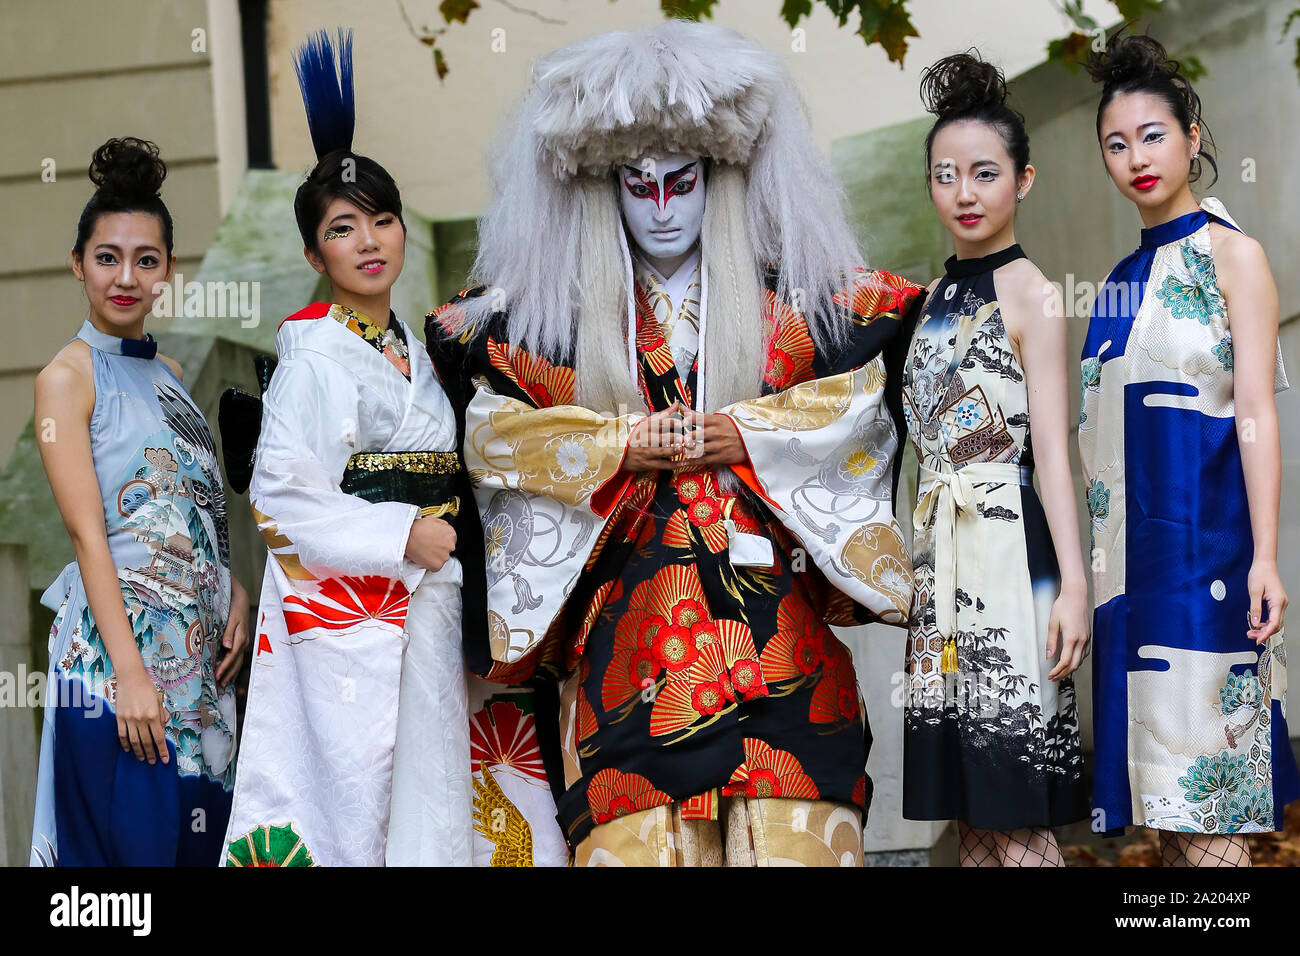 London, UK. 29th Sep, 2019. Performers are seen in Japanese costume during the annual Japan Matsuri festival.Festival of Japanese music, food and culture in London's Trafalgar Square, UK. Credit: SOPA Images Limited/Alamy Live News Stock Photo